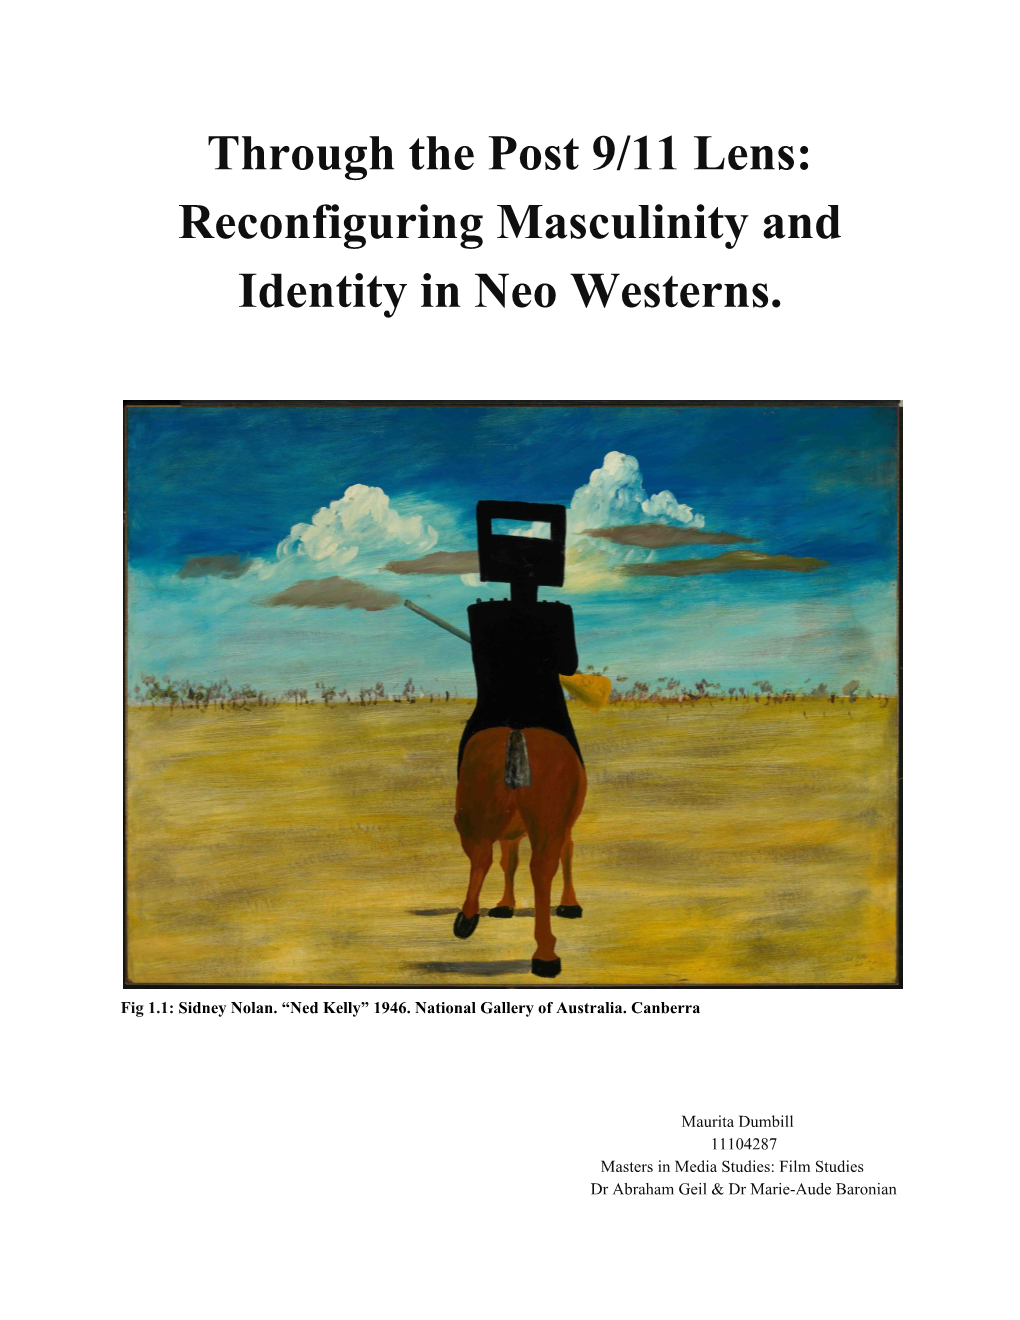 Reconfiguring Masculinity and Identity in Neo Westerns